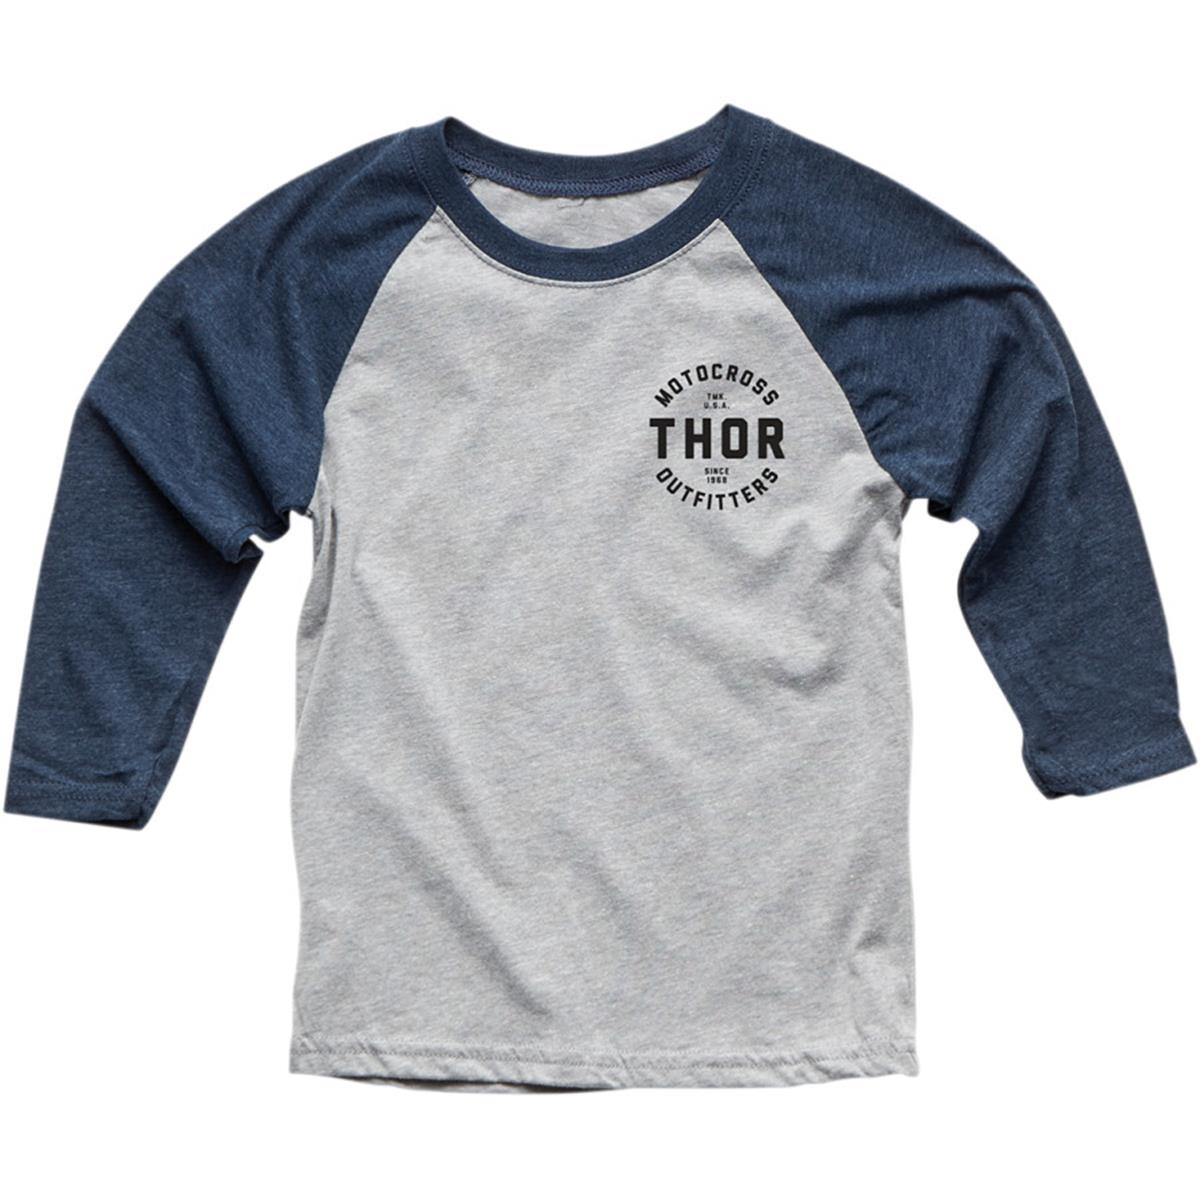 Thor Kids Shirt 3/4-Sleeve Outfitters Navy